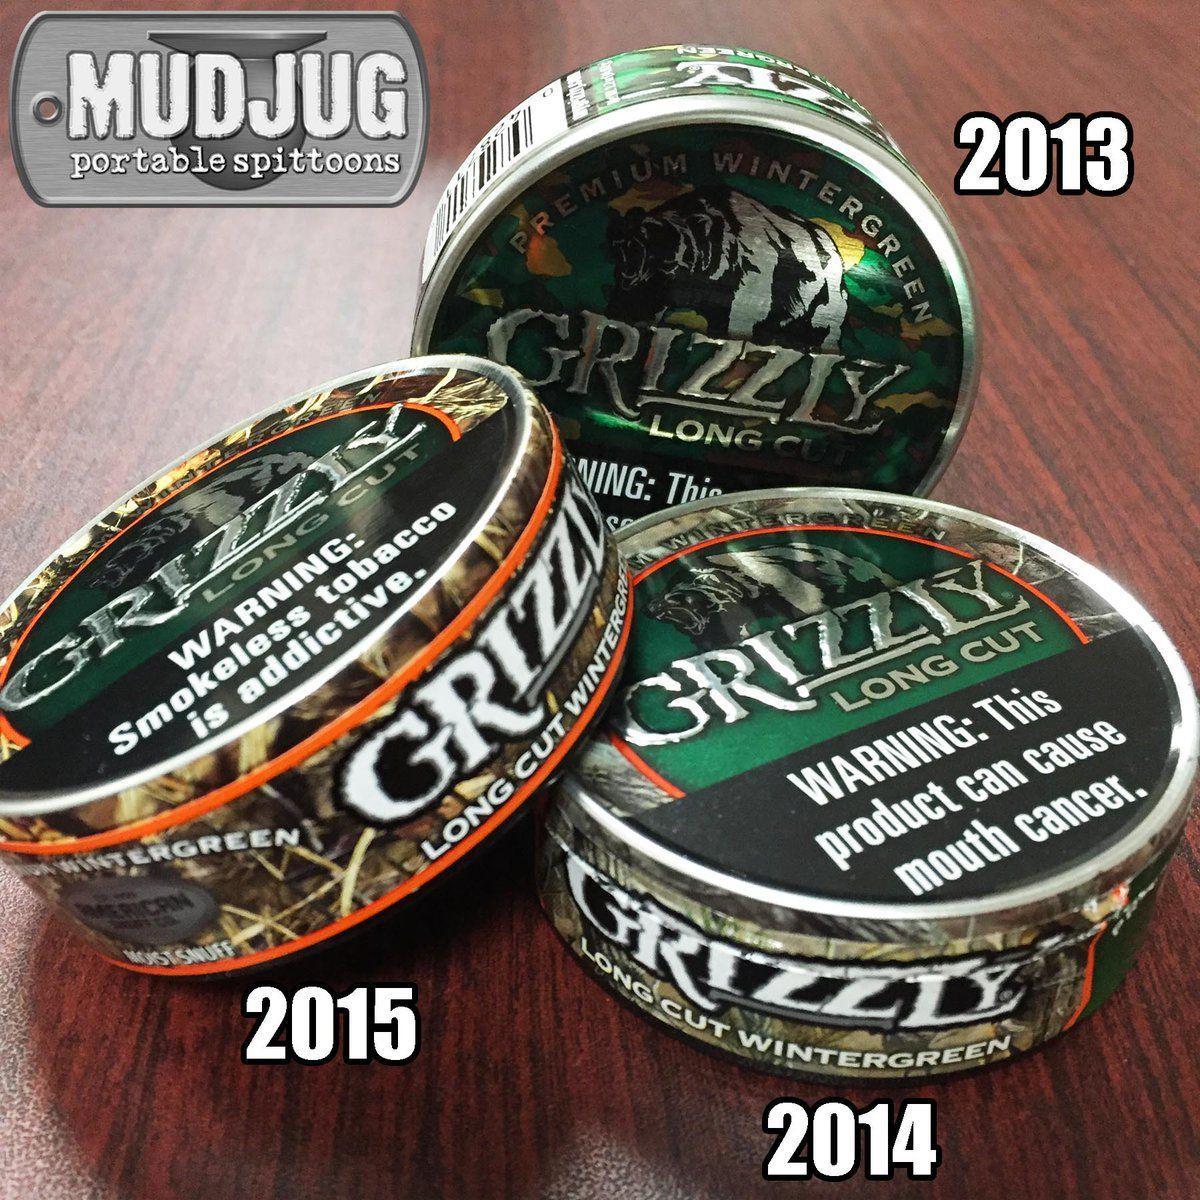 New Grizzly Tobacco Logo - Darcy MUDJUG Compton new Grizzly camo cans compared